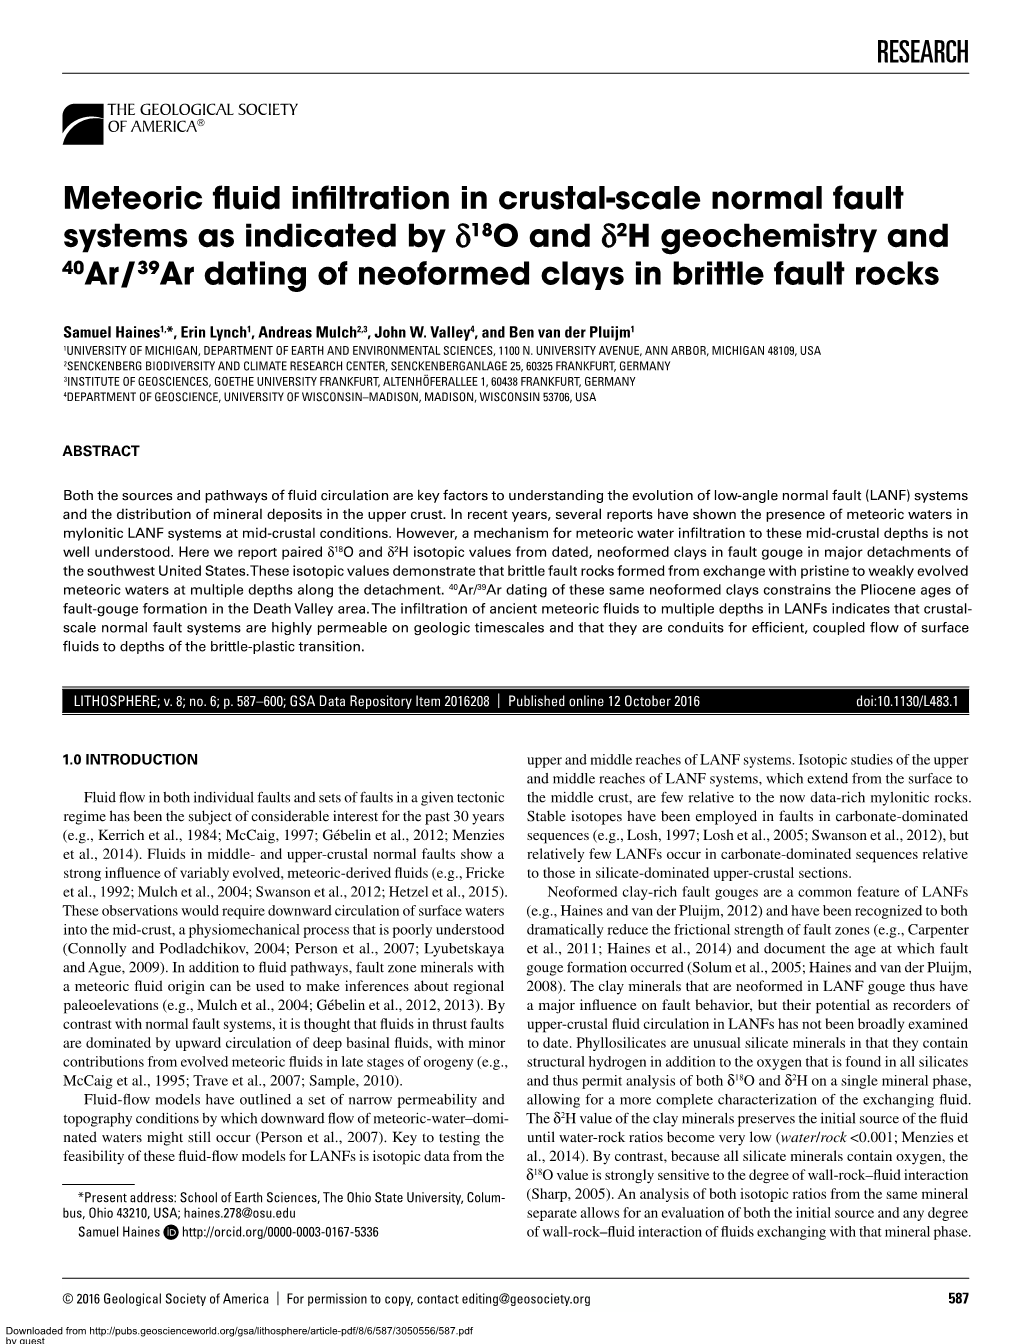 RESEARCH Meteoric Fluid Infiltration in Crustal-Scale